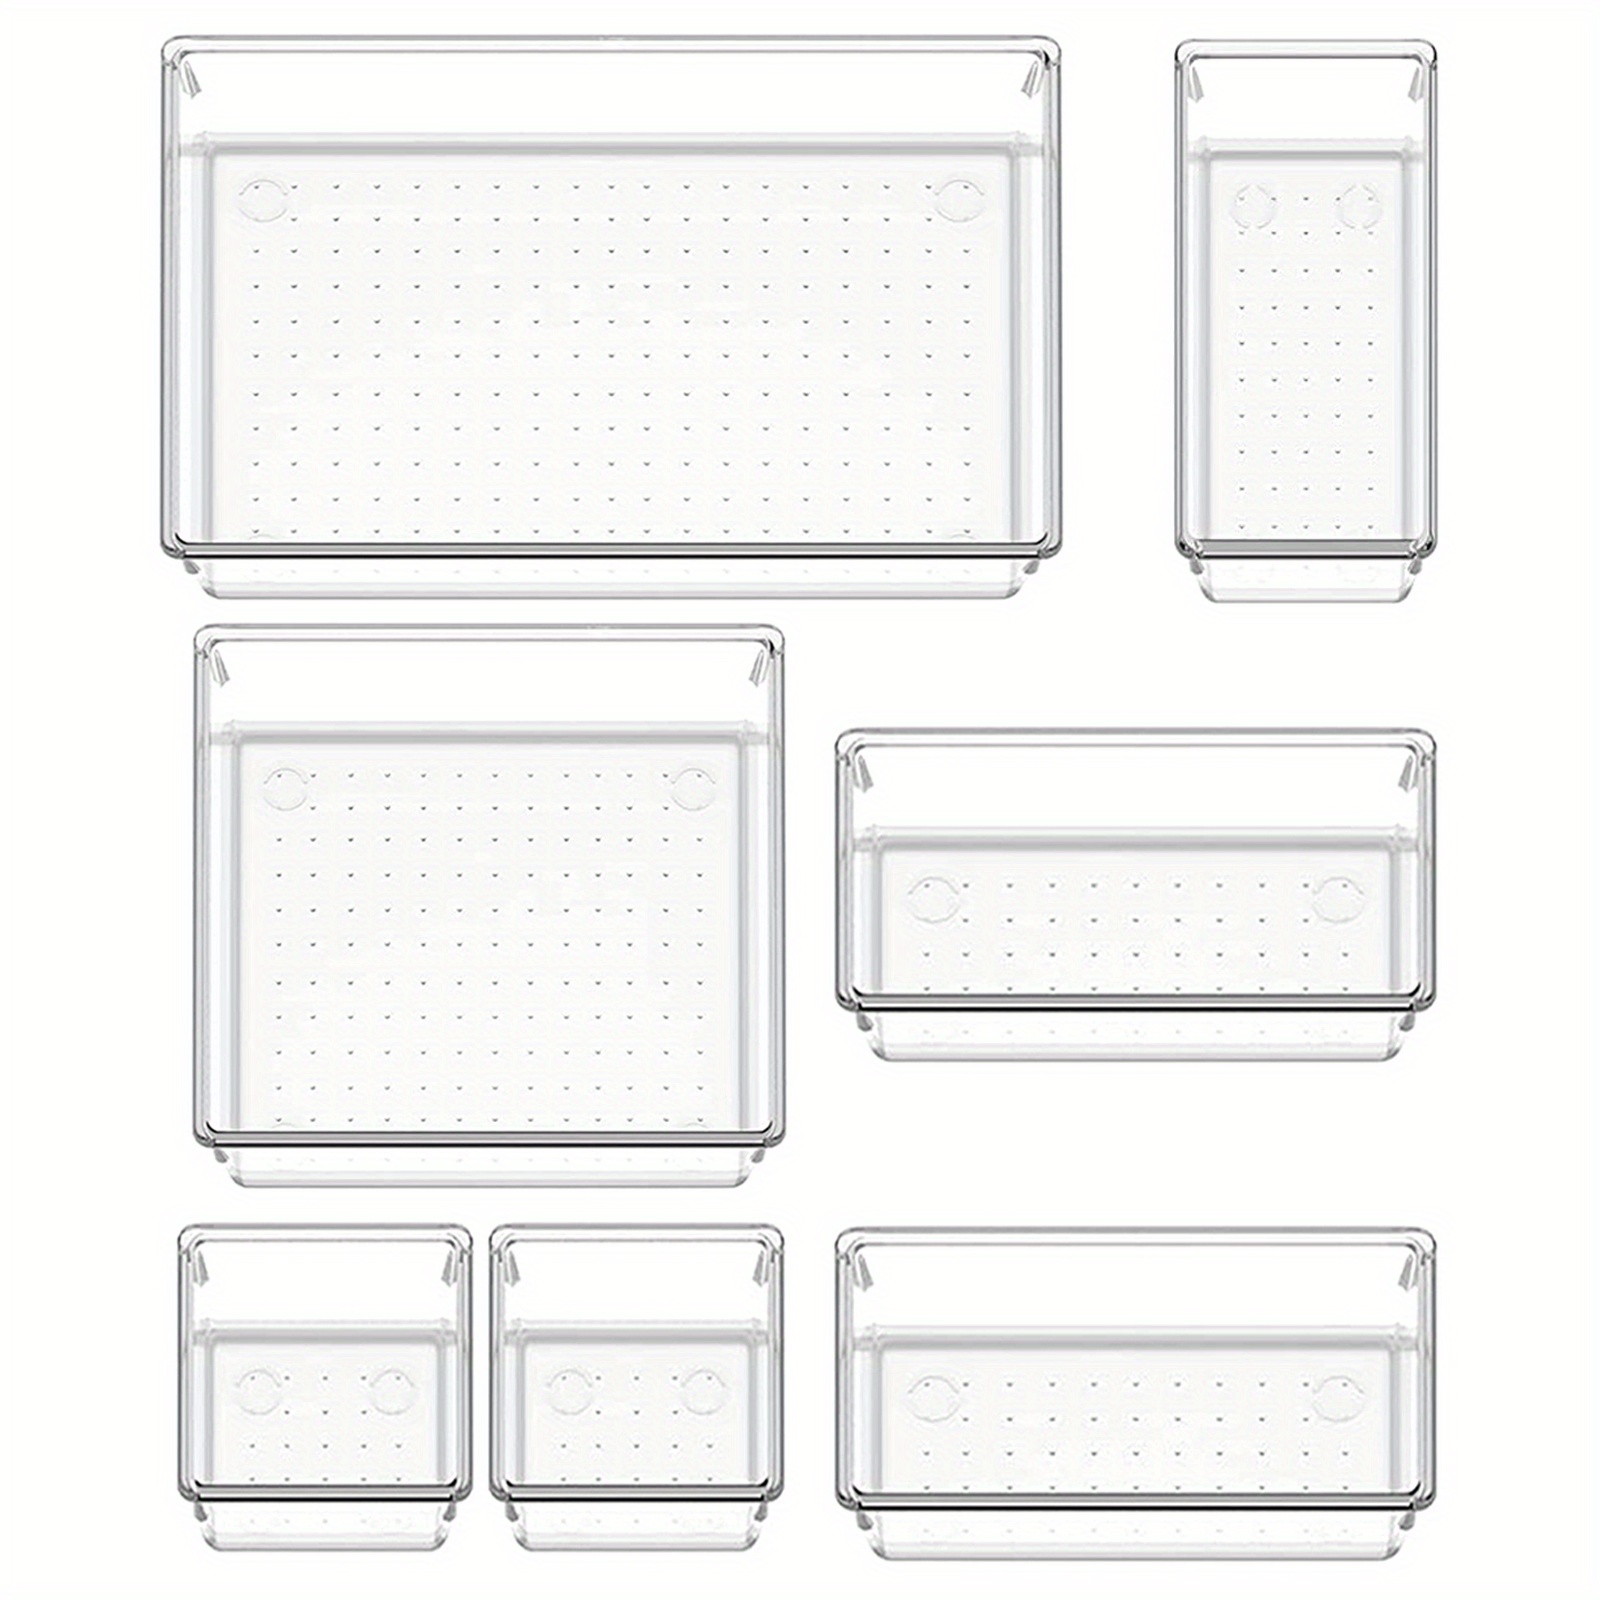 BASIC LIVING 1pc Clear Desk Drawer Organizer Tray Dividers For Bathroom  Vanity Kitchen Office